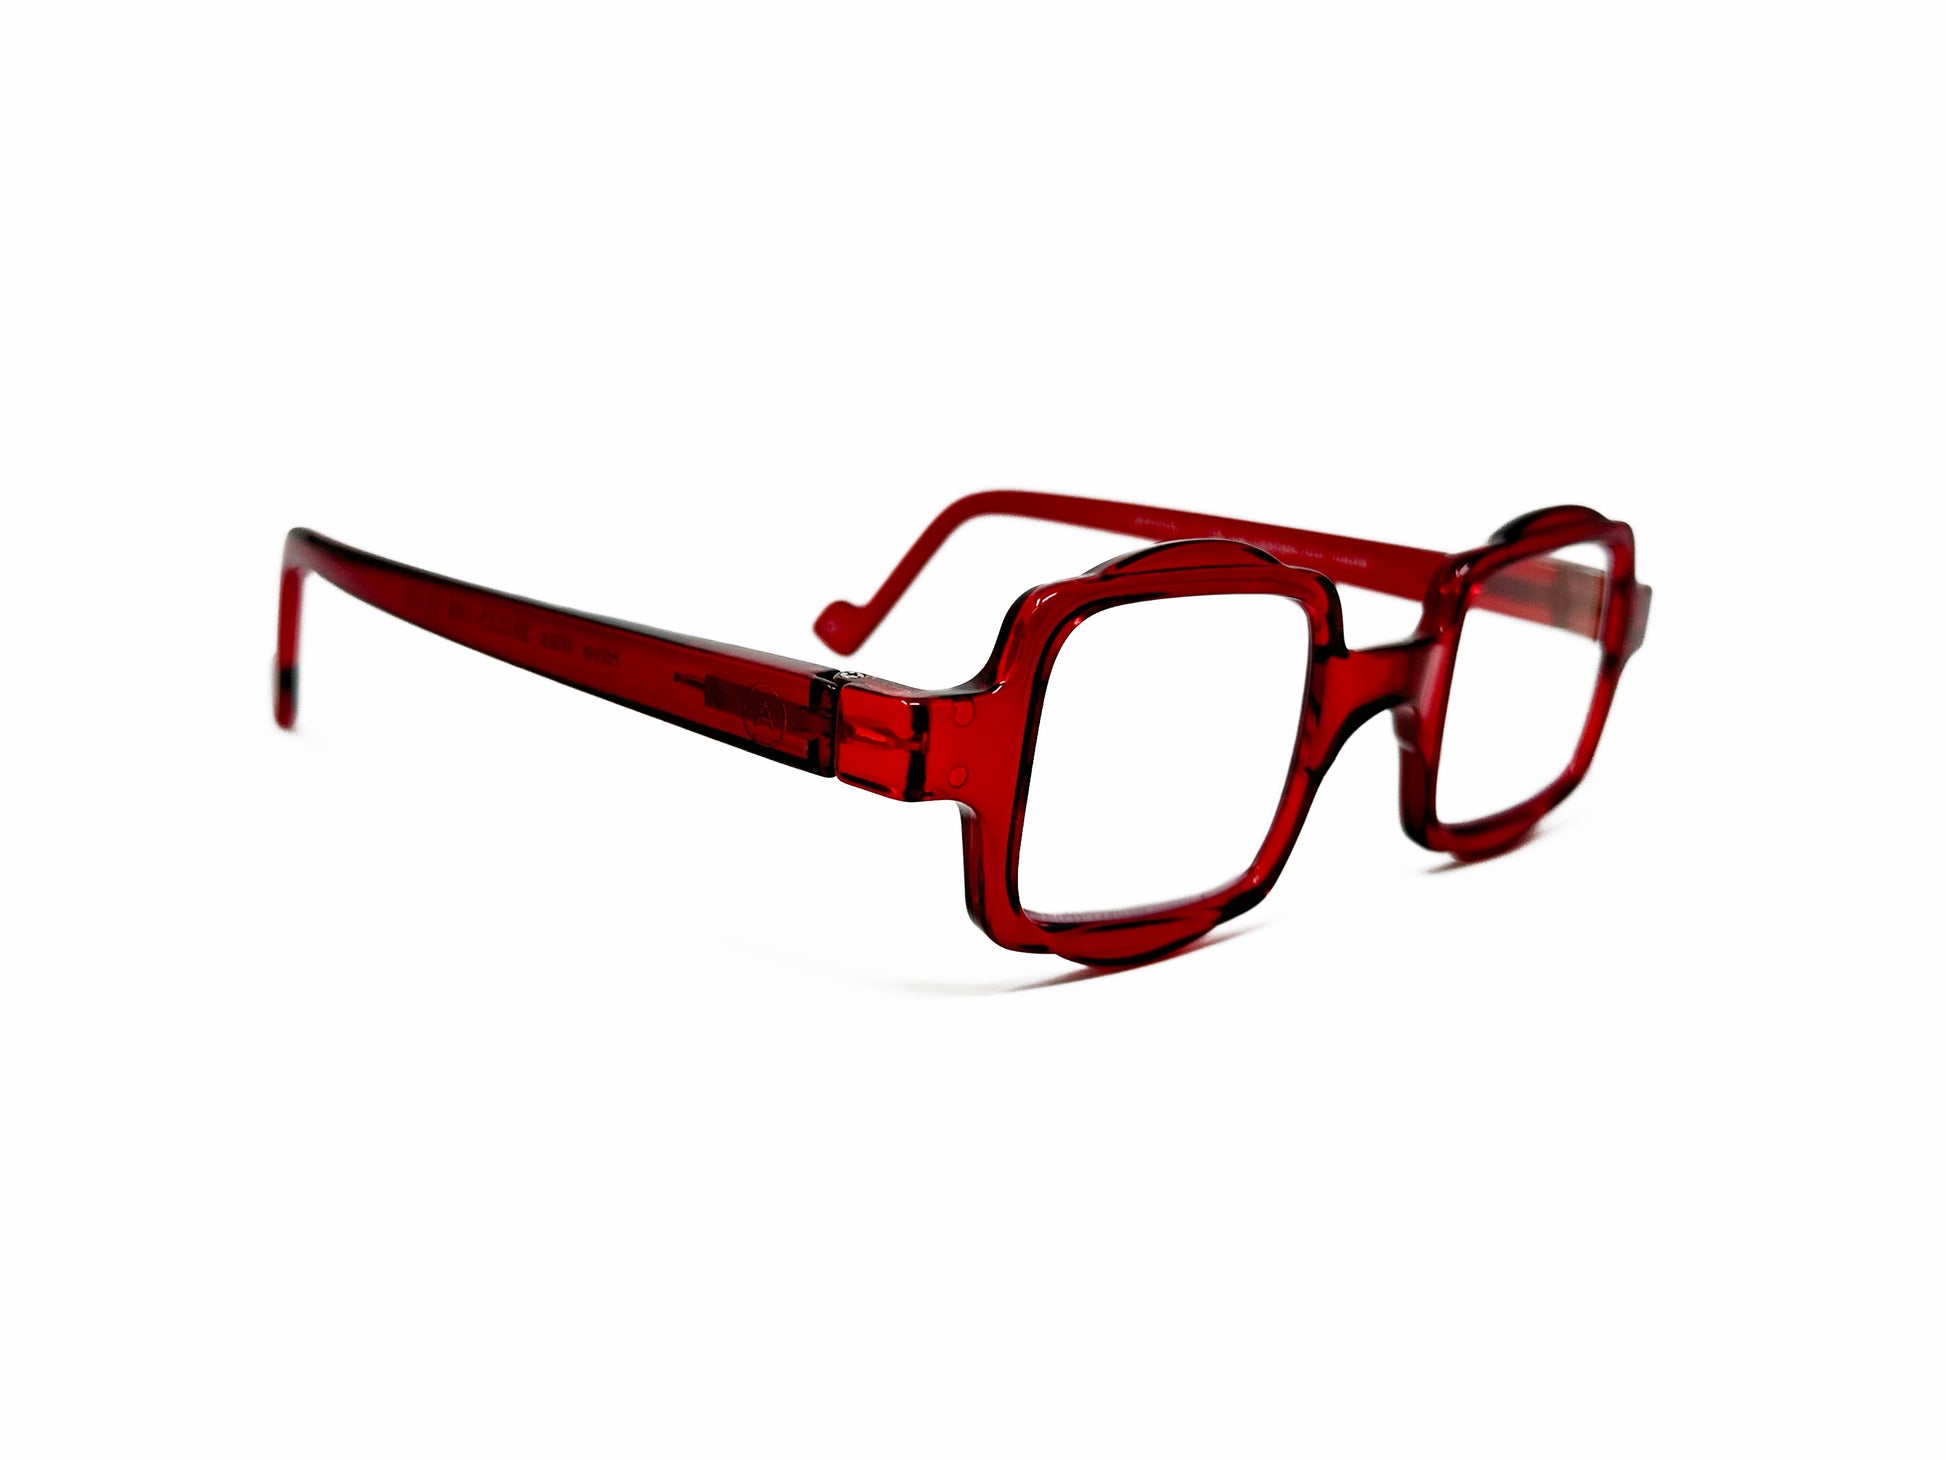 Aptica square reading glass with half-circle shape on top and bottom . Model: Hive. Color: Royal Red - Semi-transparent. Side view.